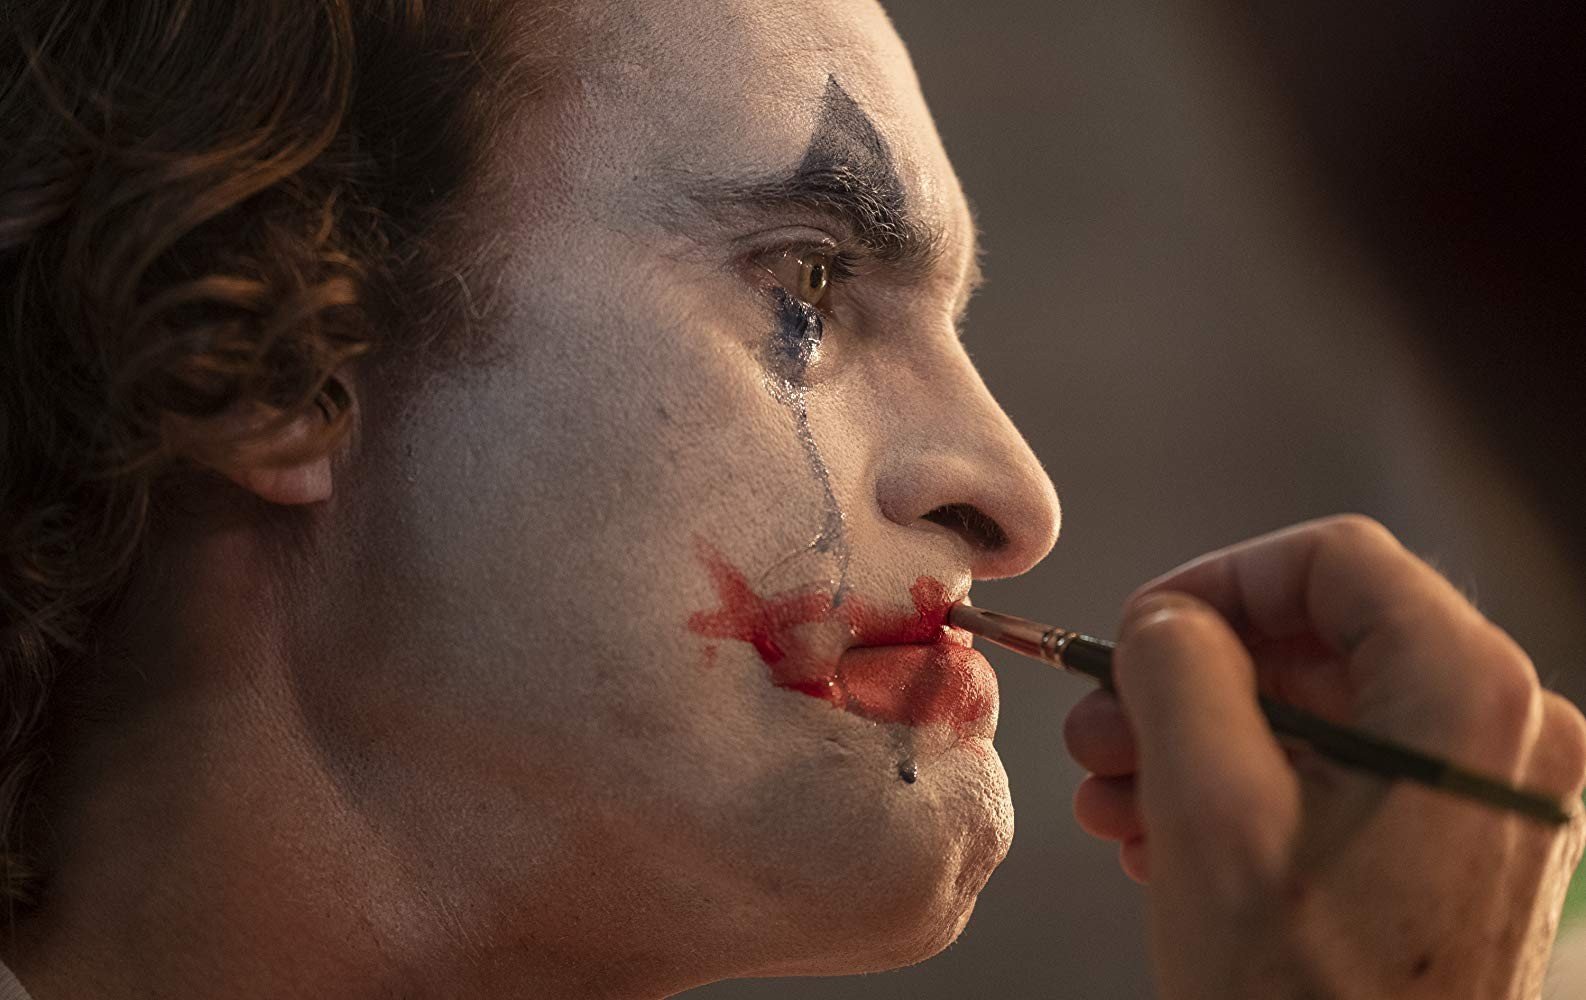 Joaquin Phoenix’s portrayal of the Joker, in the film of the same name, is tipped to clean up come awards season.